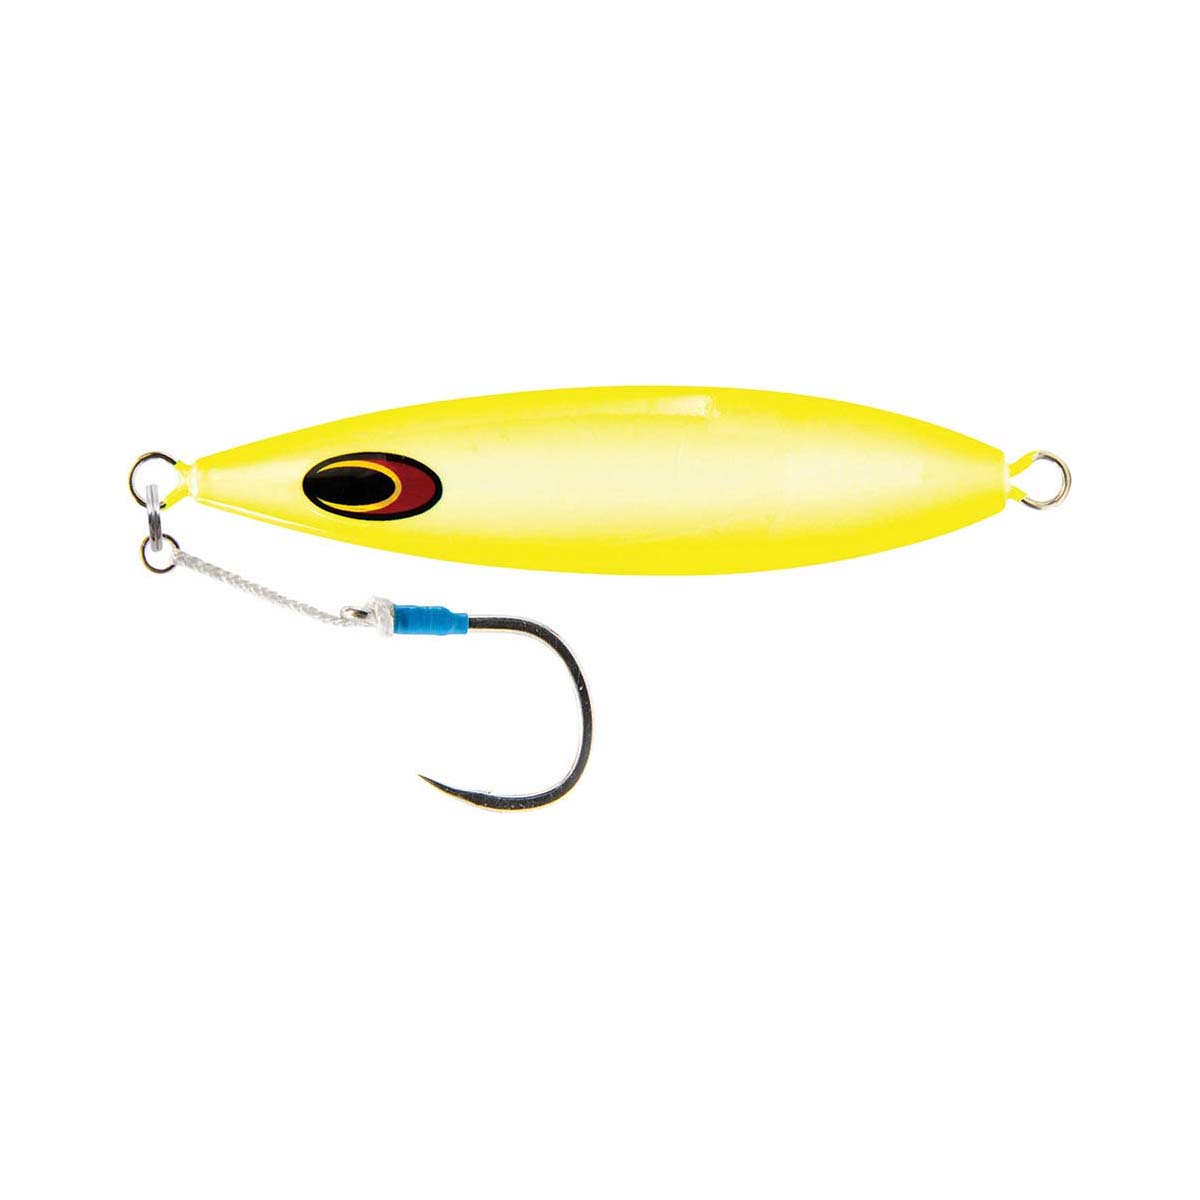 Nomad Gypsea Jig Lure 160g Chartreuse White Glow @ Club BCF